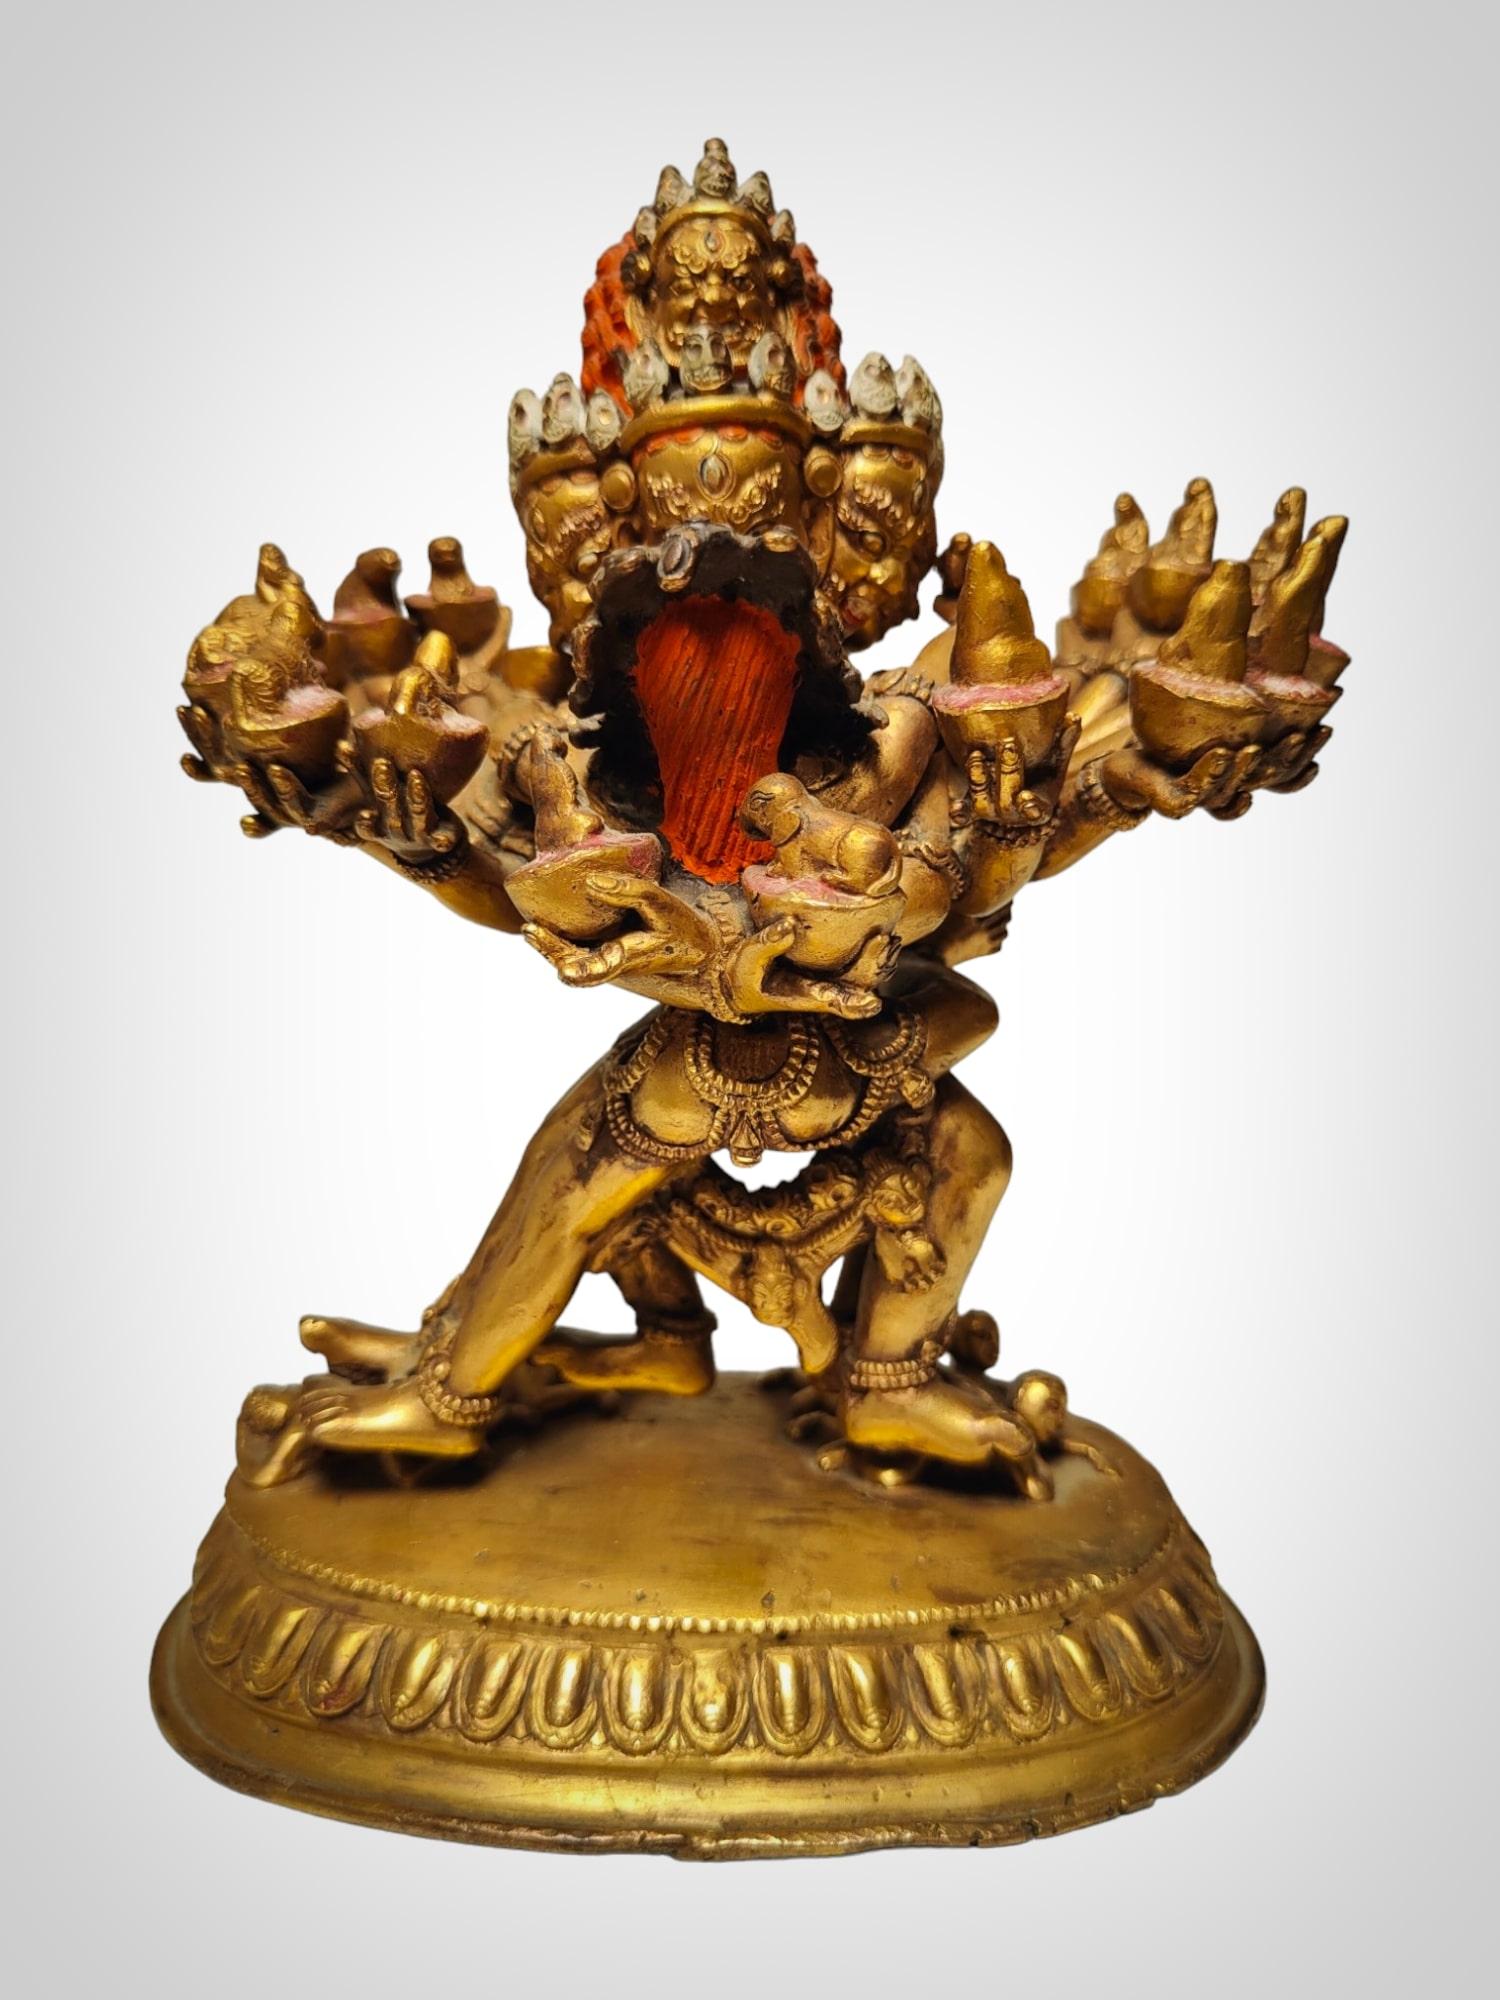 Immerse yourself in the divine splendor of this 18th-century Tibetan masterpiece—a gilt bronze figure depicting Cakrasamvara in the revered Yab Yum pose. Standing at a size of 21x17x10 cm, this exquisite sculpture is a testament to the spiritual and